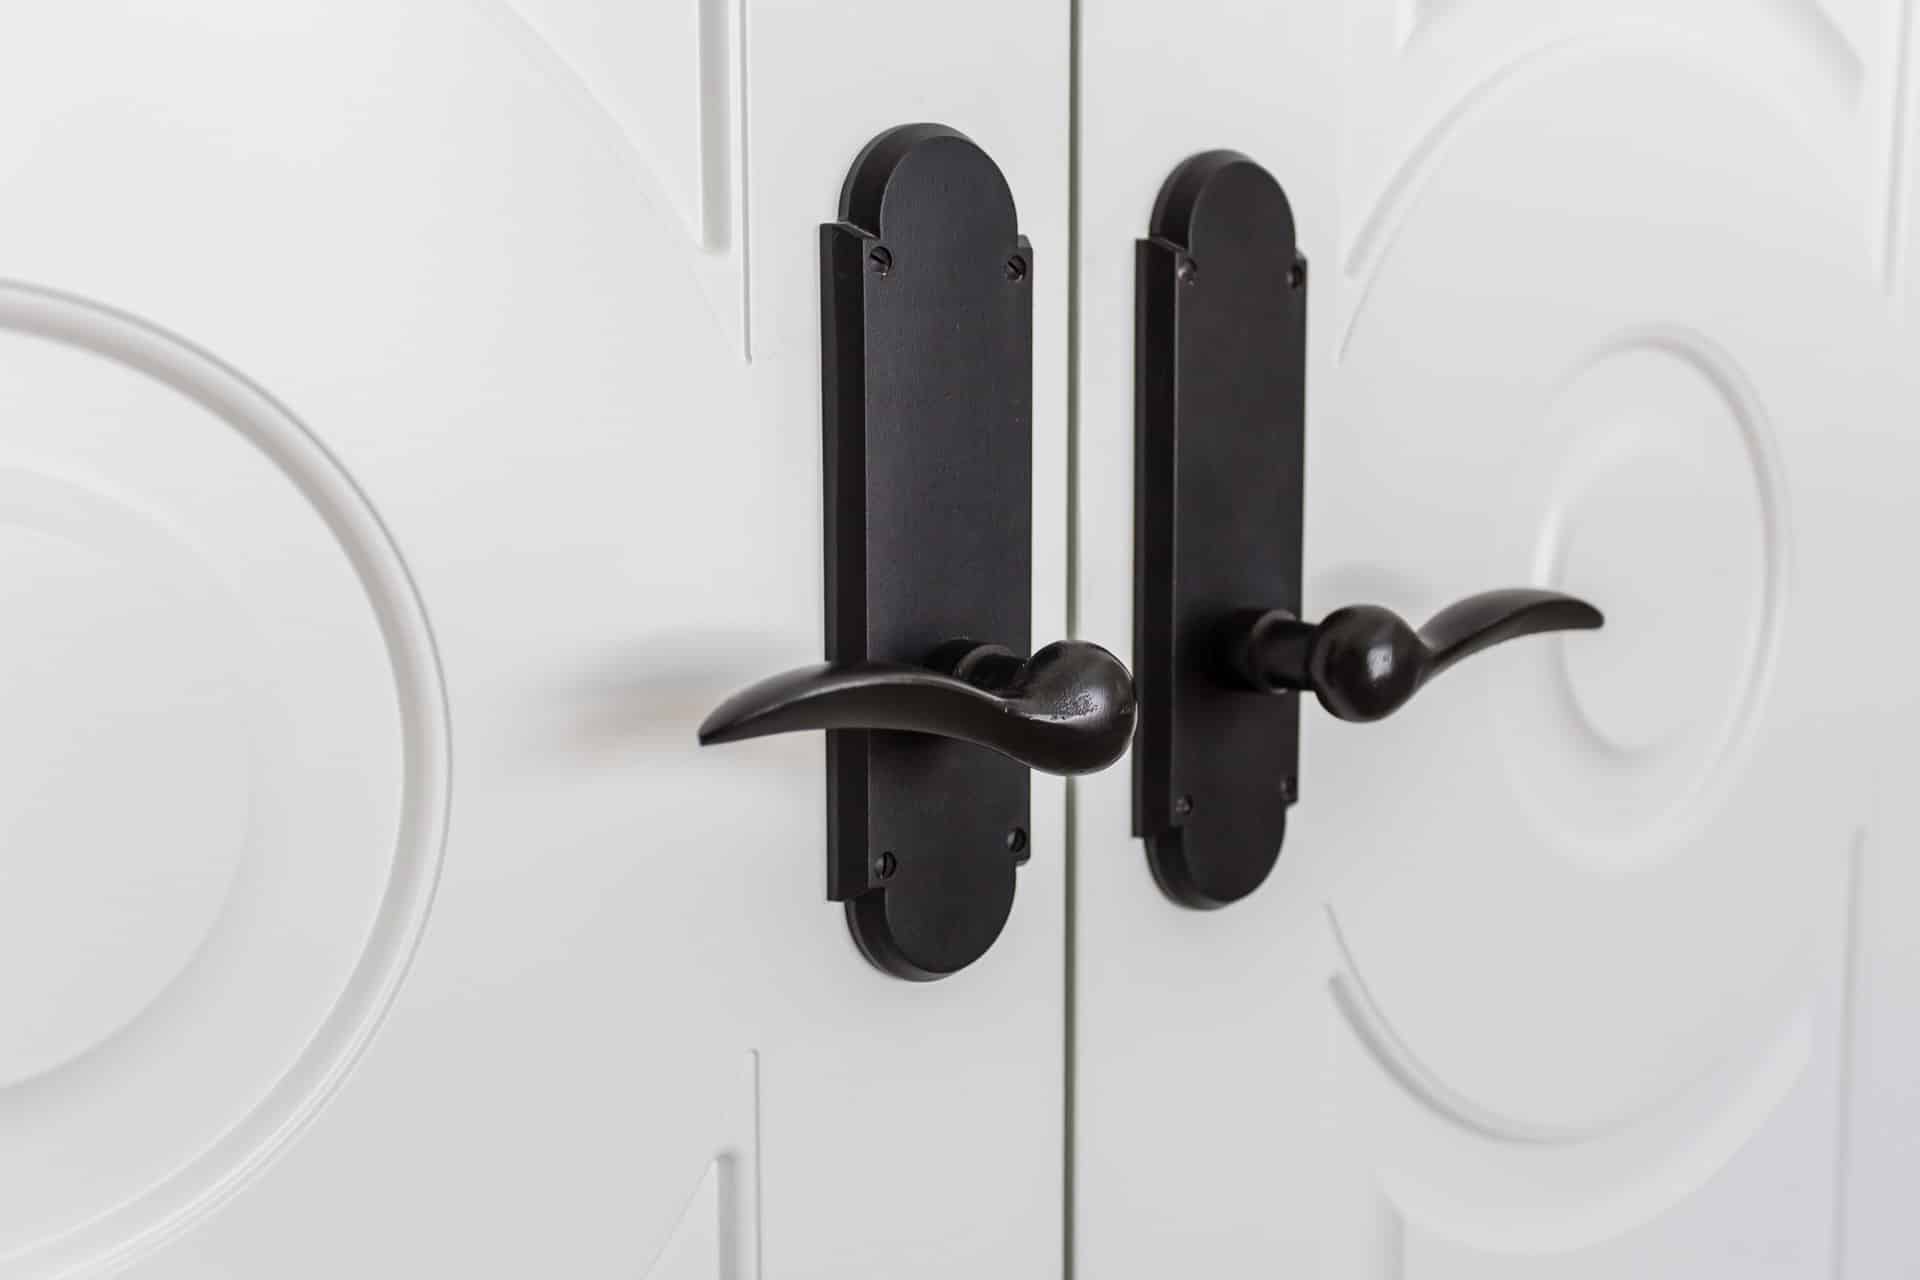 How to properly install door knobs and levers.